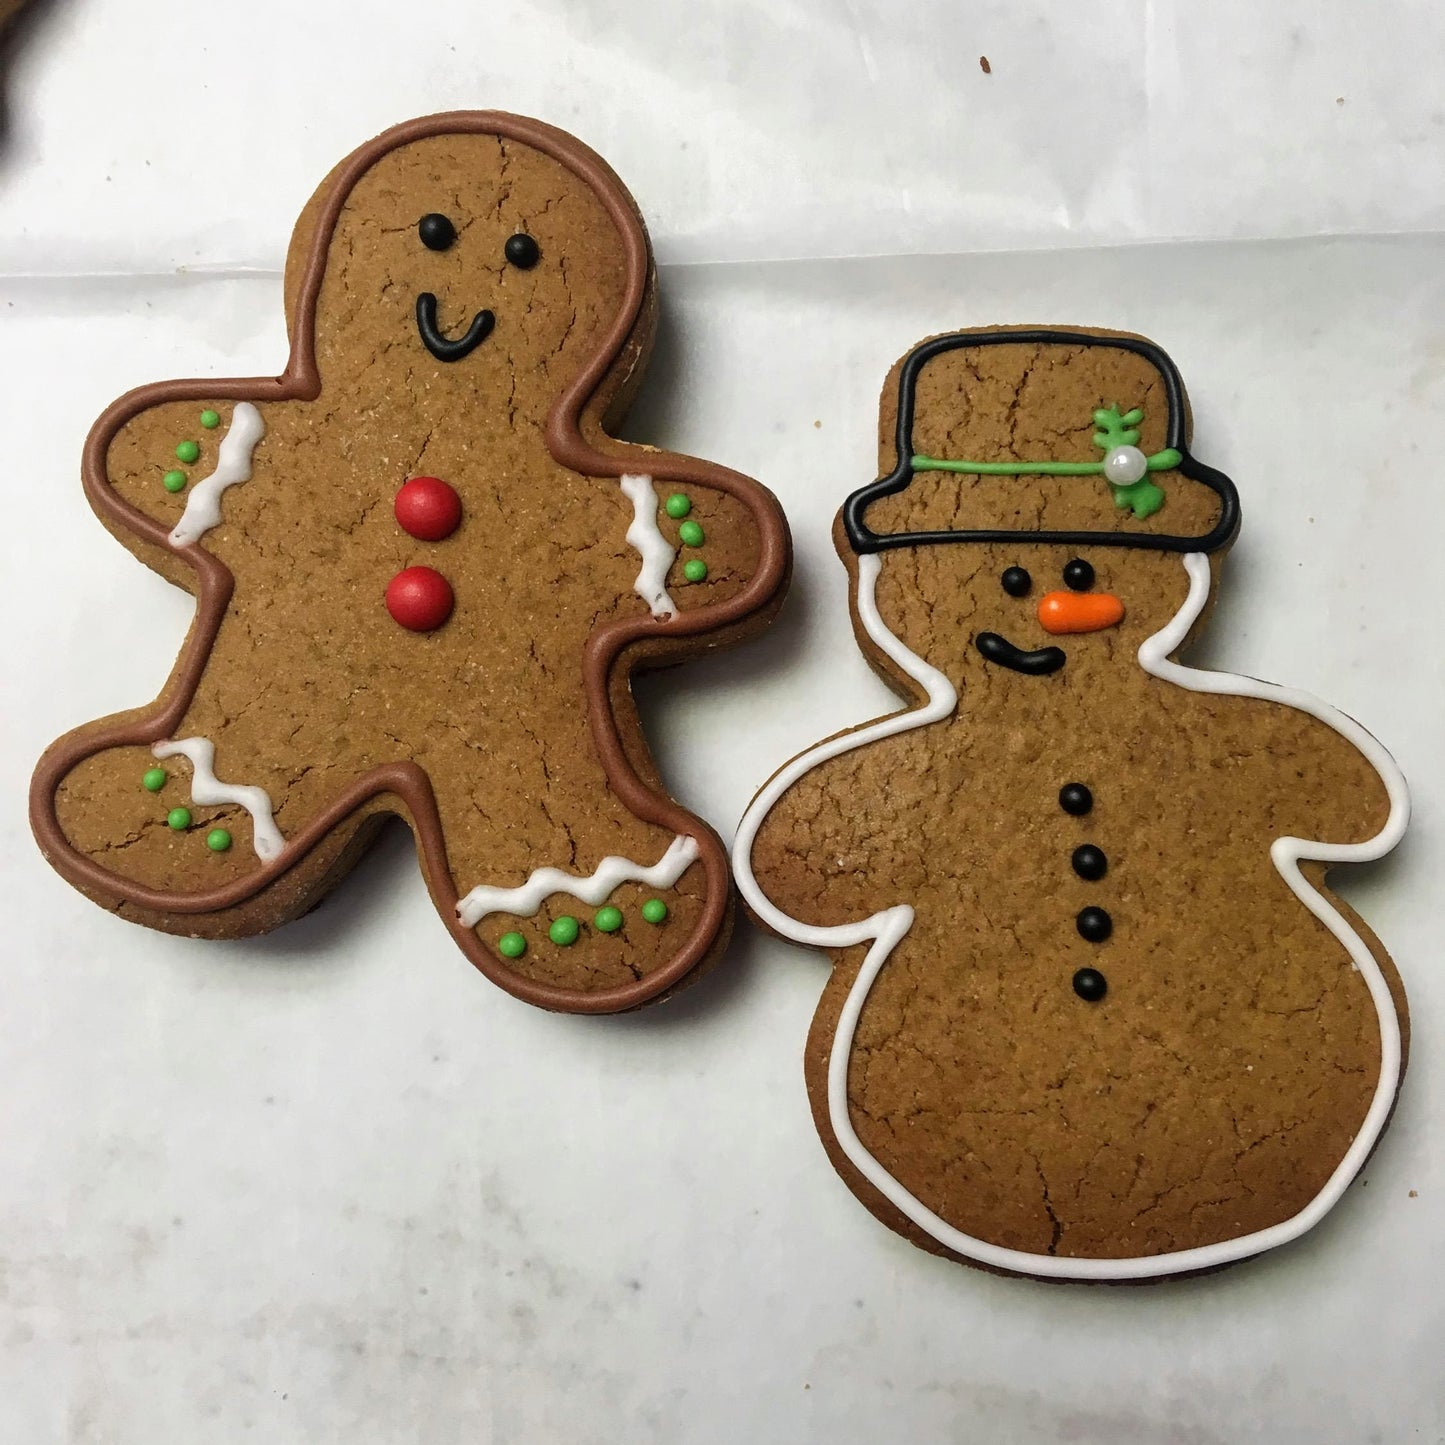    Bring home some fun with our DIY cookie kits. Each kit comes with one predecorated cookie and a variety of 5 blank cookies and decorations for you to design as you wish. Kits are available for pickup or shipping. Instructions included.